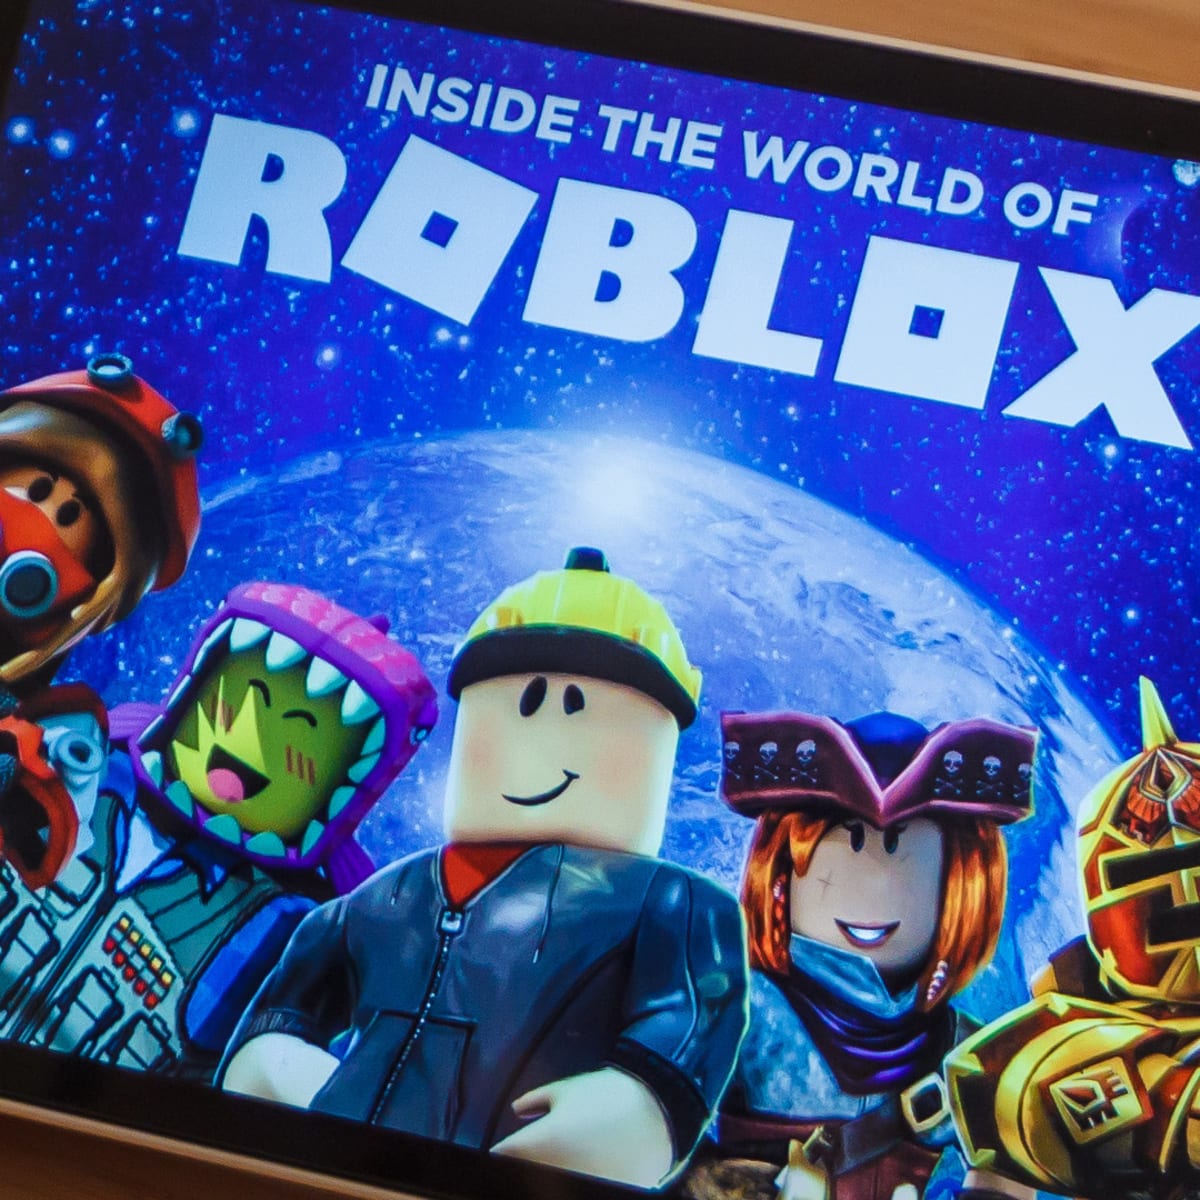 Game Platform Roblox Files Confidentially For Public Listing Thestreet - president day sale 2020 roblox